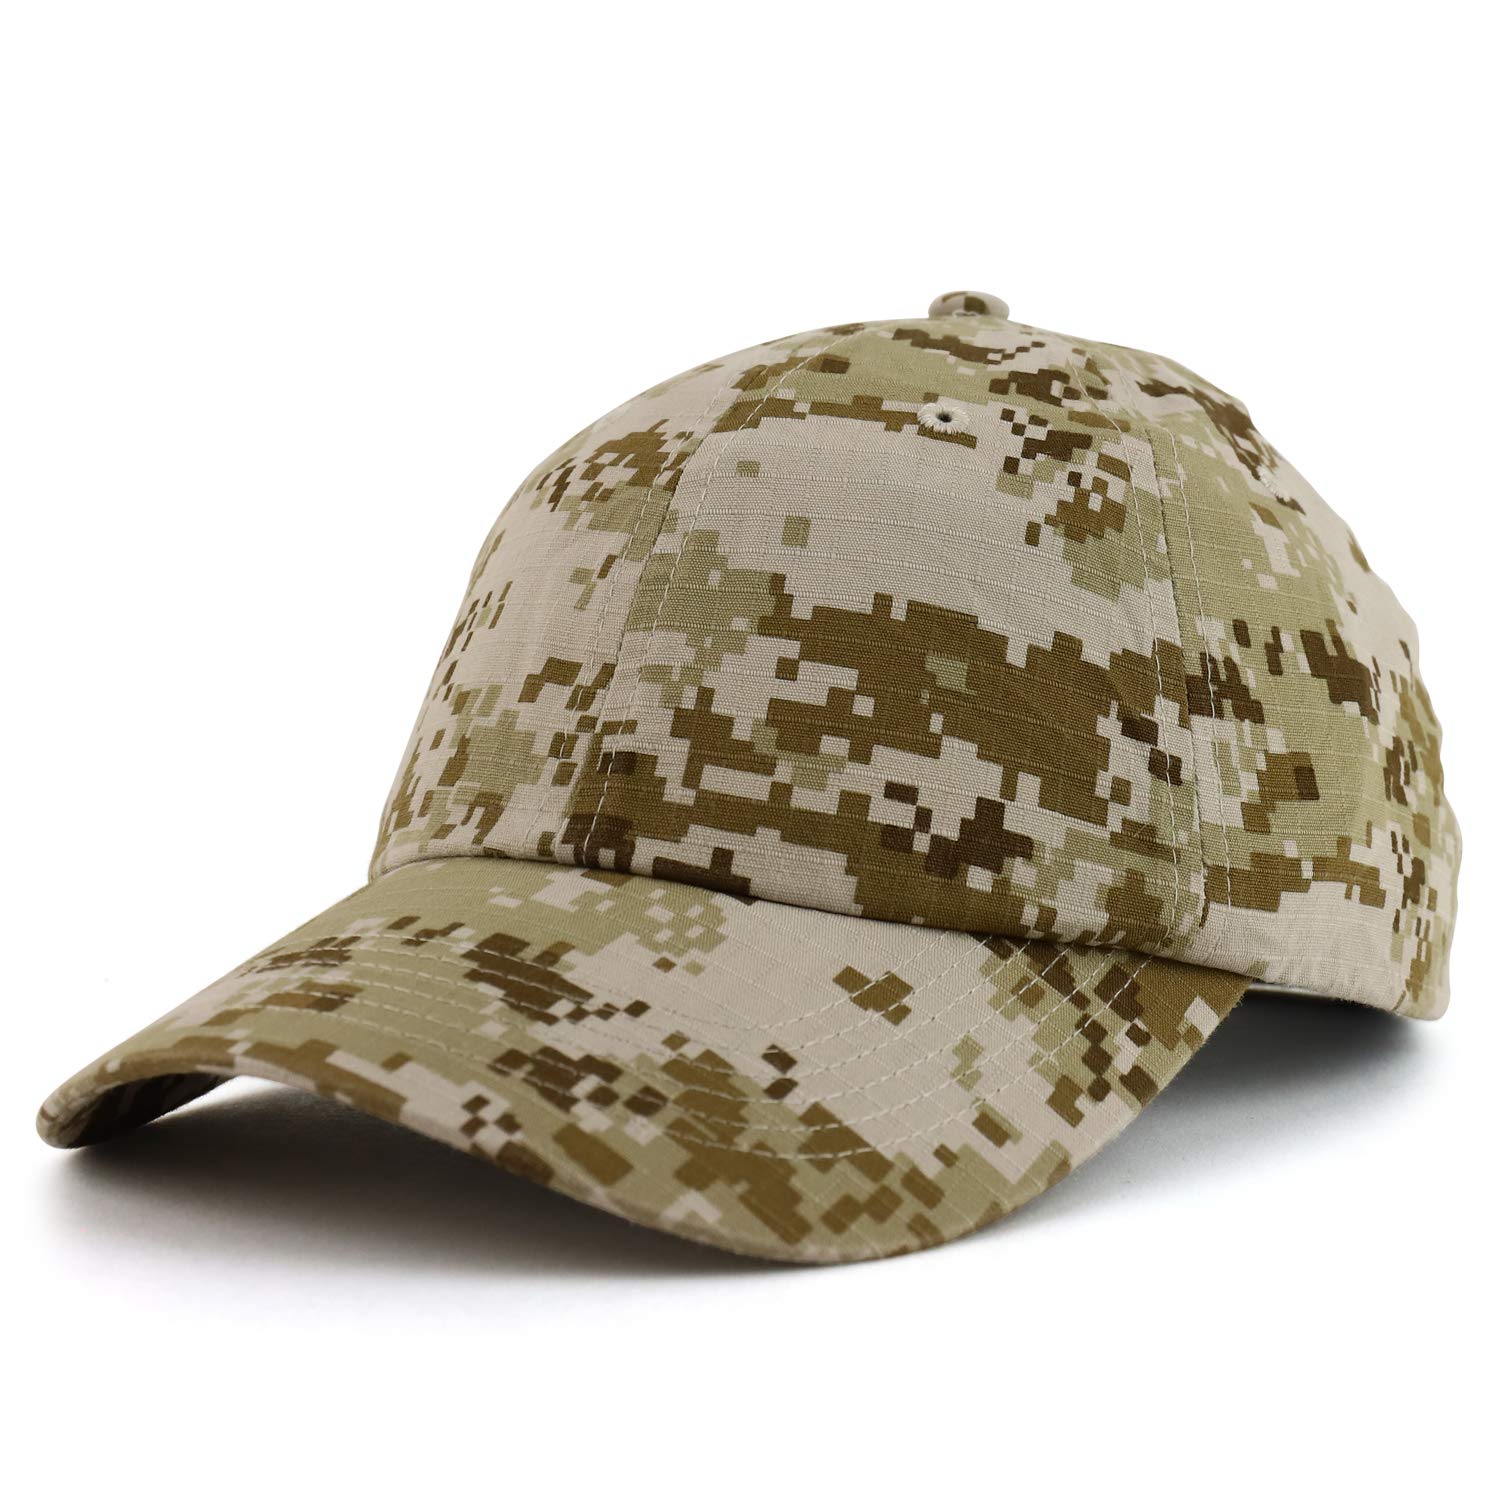 Armycrew Digital Camouflage Unstructured Cotton Ripstop Baseball Cap